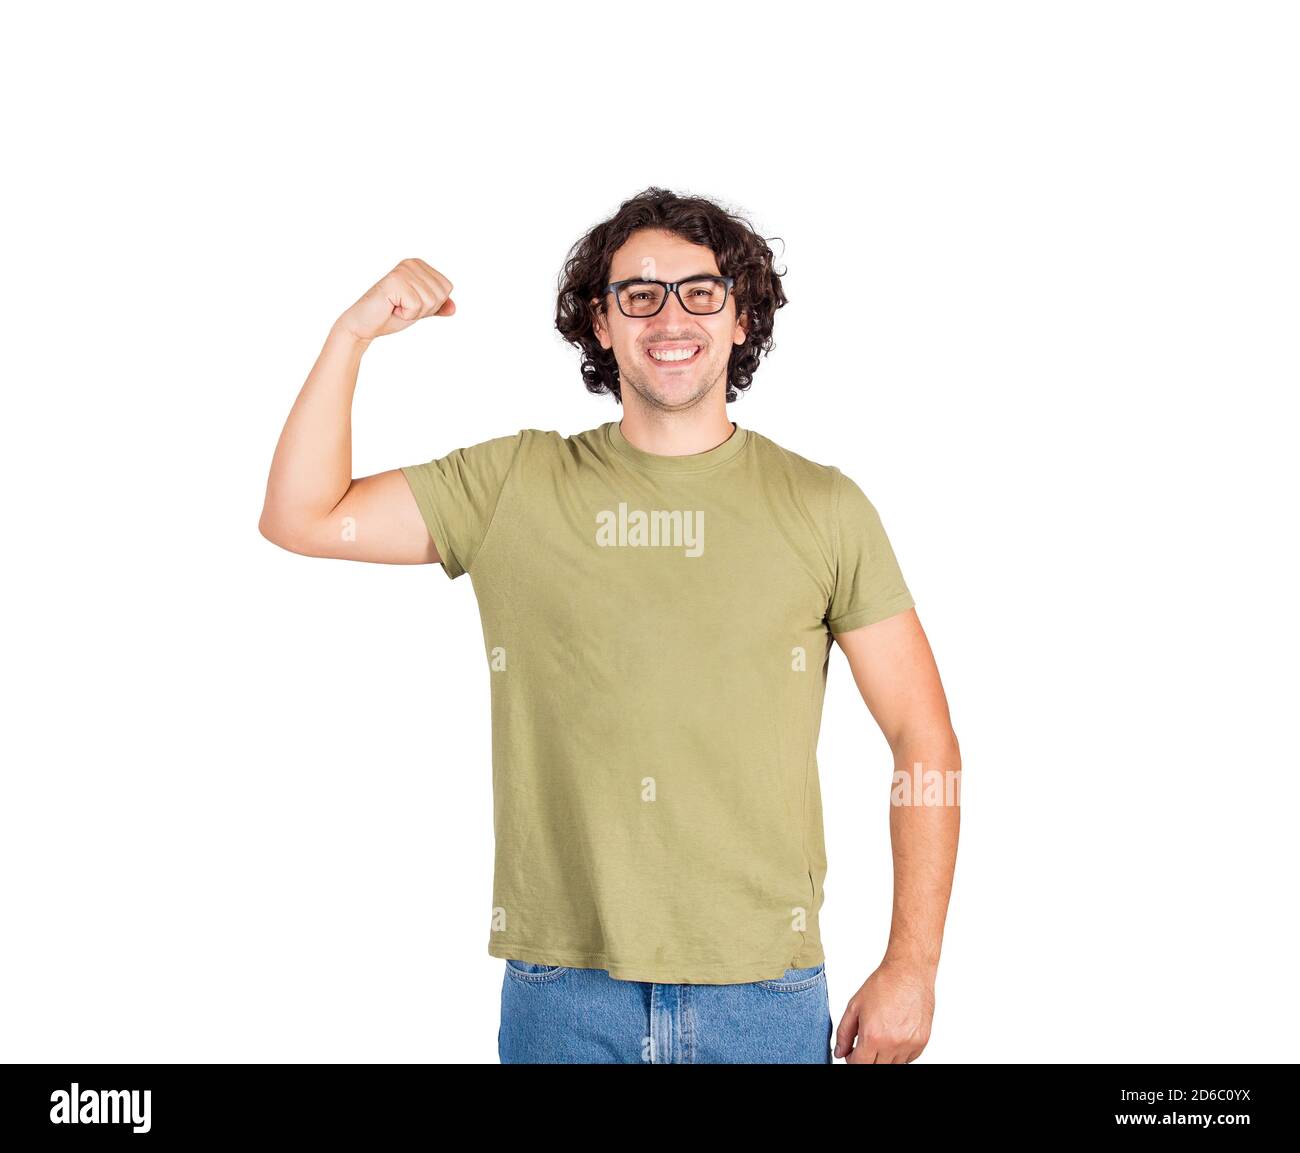 Joyful young man flexing one hand biceps, imagine superpower. Nerd guy wears eyeglasses shows his muscle strength, smiling positive to camera. Persona Stock Photo